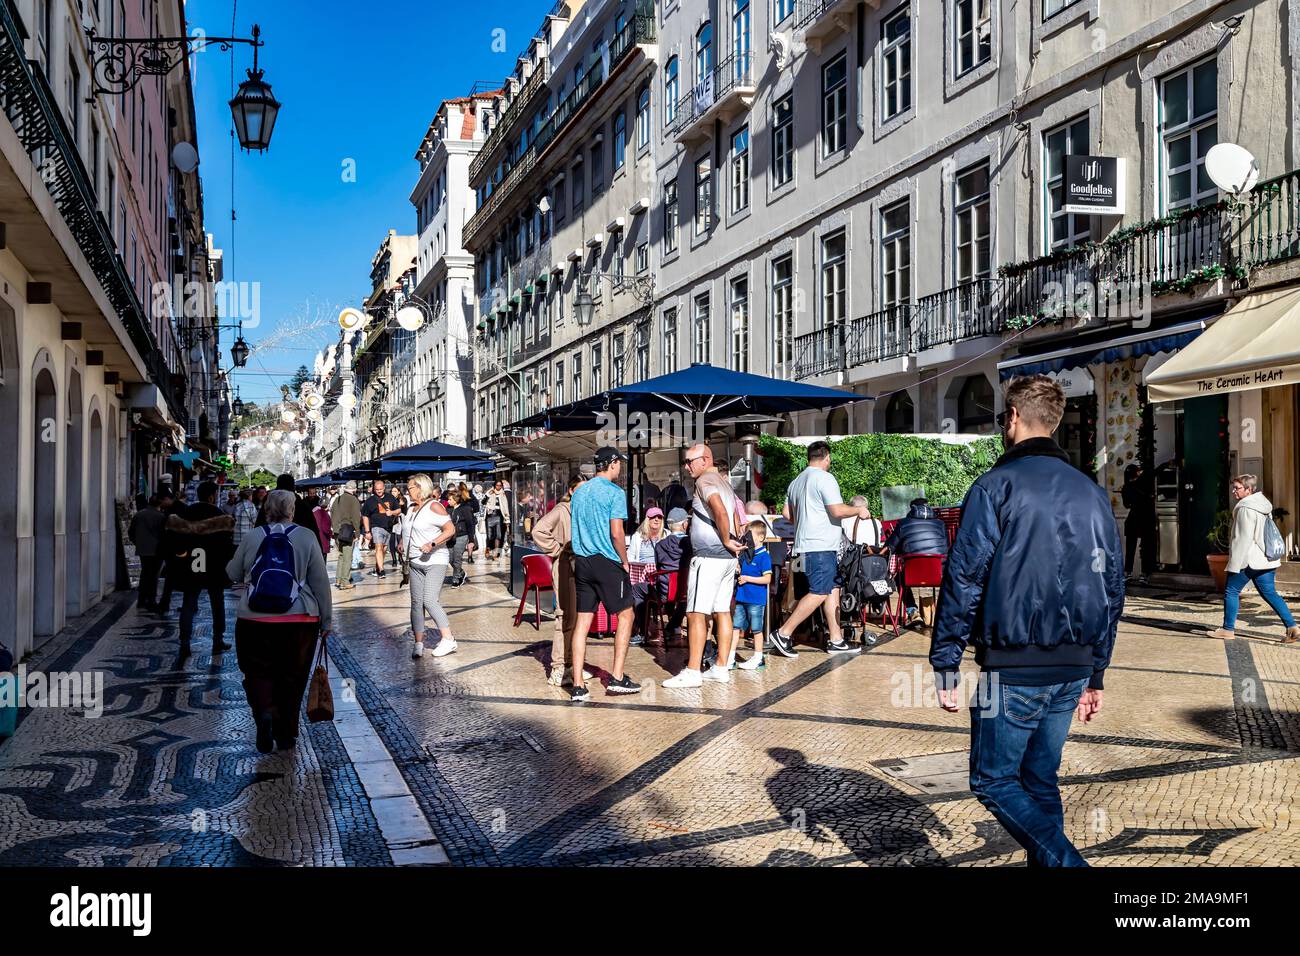 R Augusta pedestian area with outdoor cafes, Lisbon, Portugal. Stock Photo